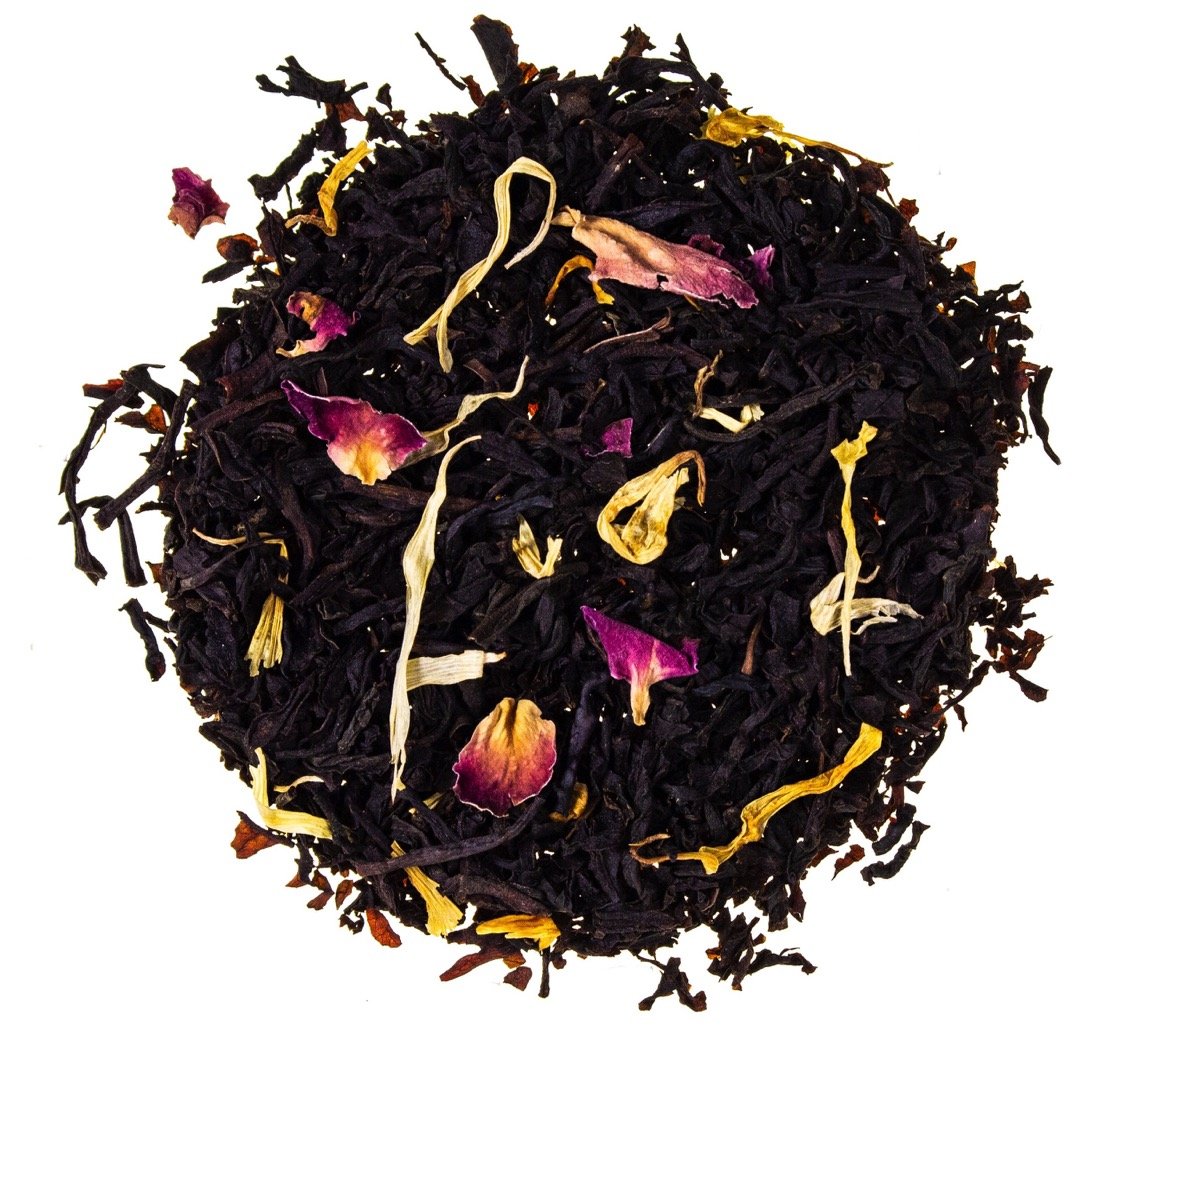 Our award winning Copenhagen tea, is the perfect gift for any tea lover. Best loose leaf tea / best tasting Australian tea.  Delicate orange, vanilla & soft tones of apricot are combined to create this beautiful tea, (our twist on the classic Stockholm tea), finished with a fresh bouquet of floral notes.  